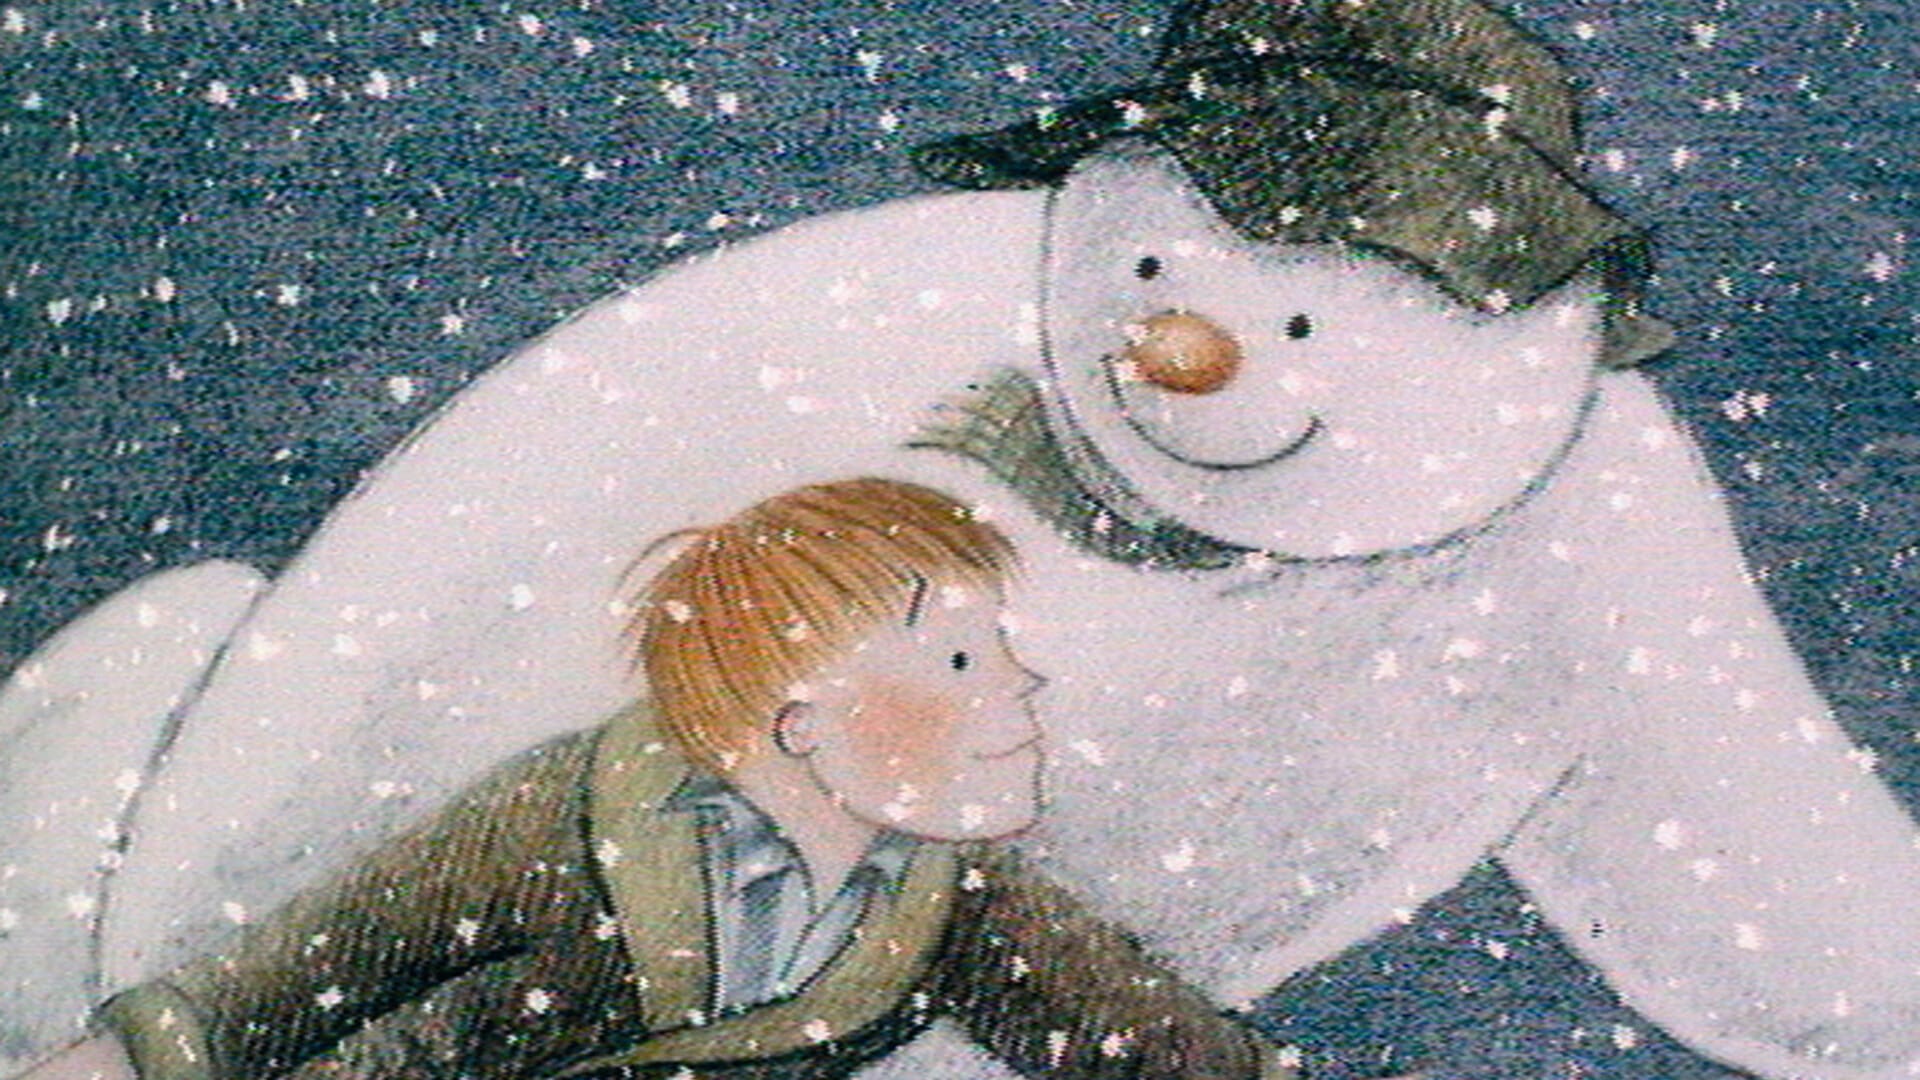 Picture of James and The Snowman in flight from the famous book and film by Raymond Briggs